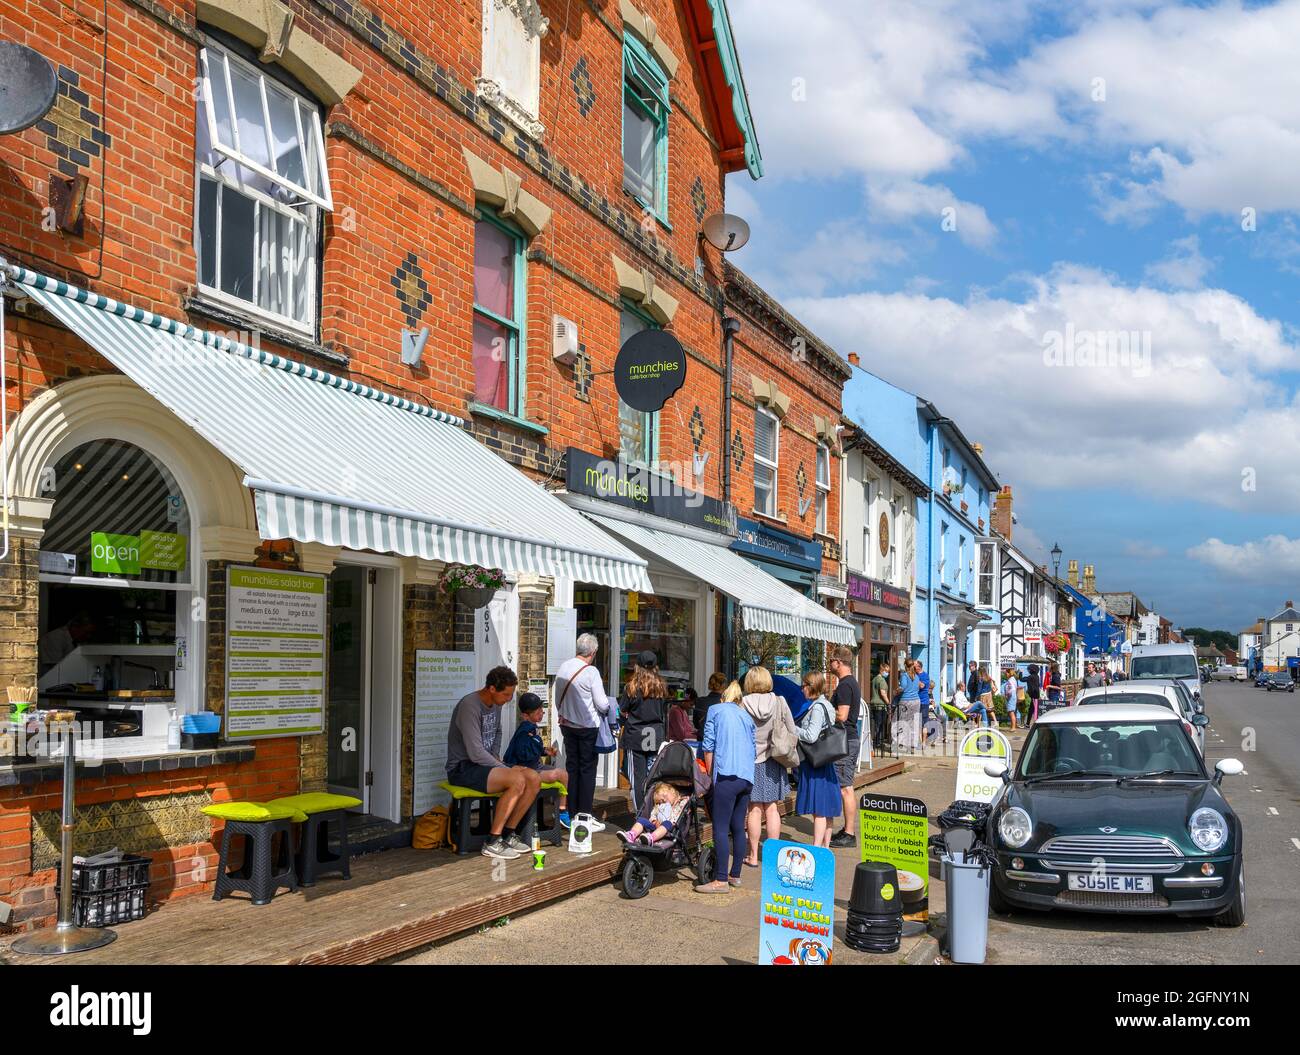 Shops and restaurants on the High Street, Aldeburgh, Suffolk, East Anglia, England, UK Stock Photo